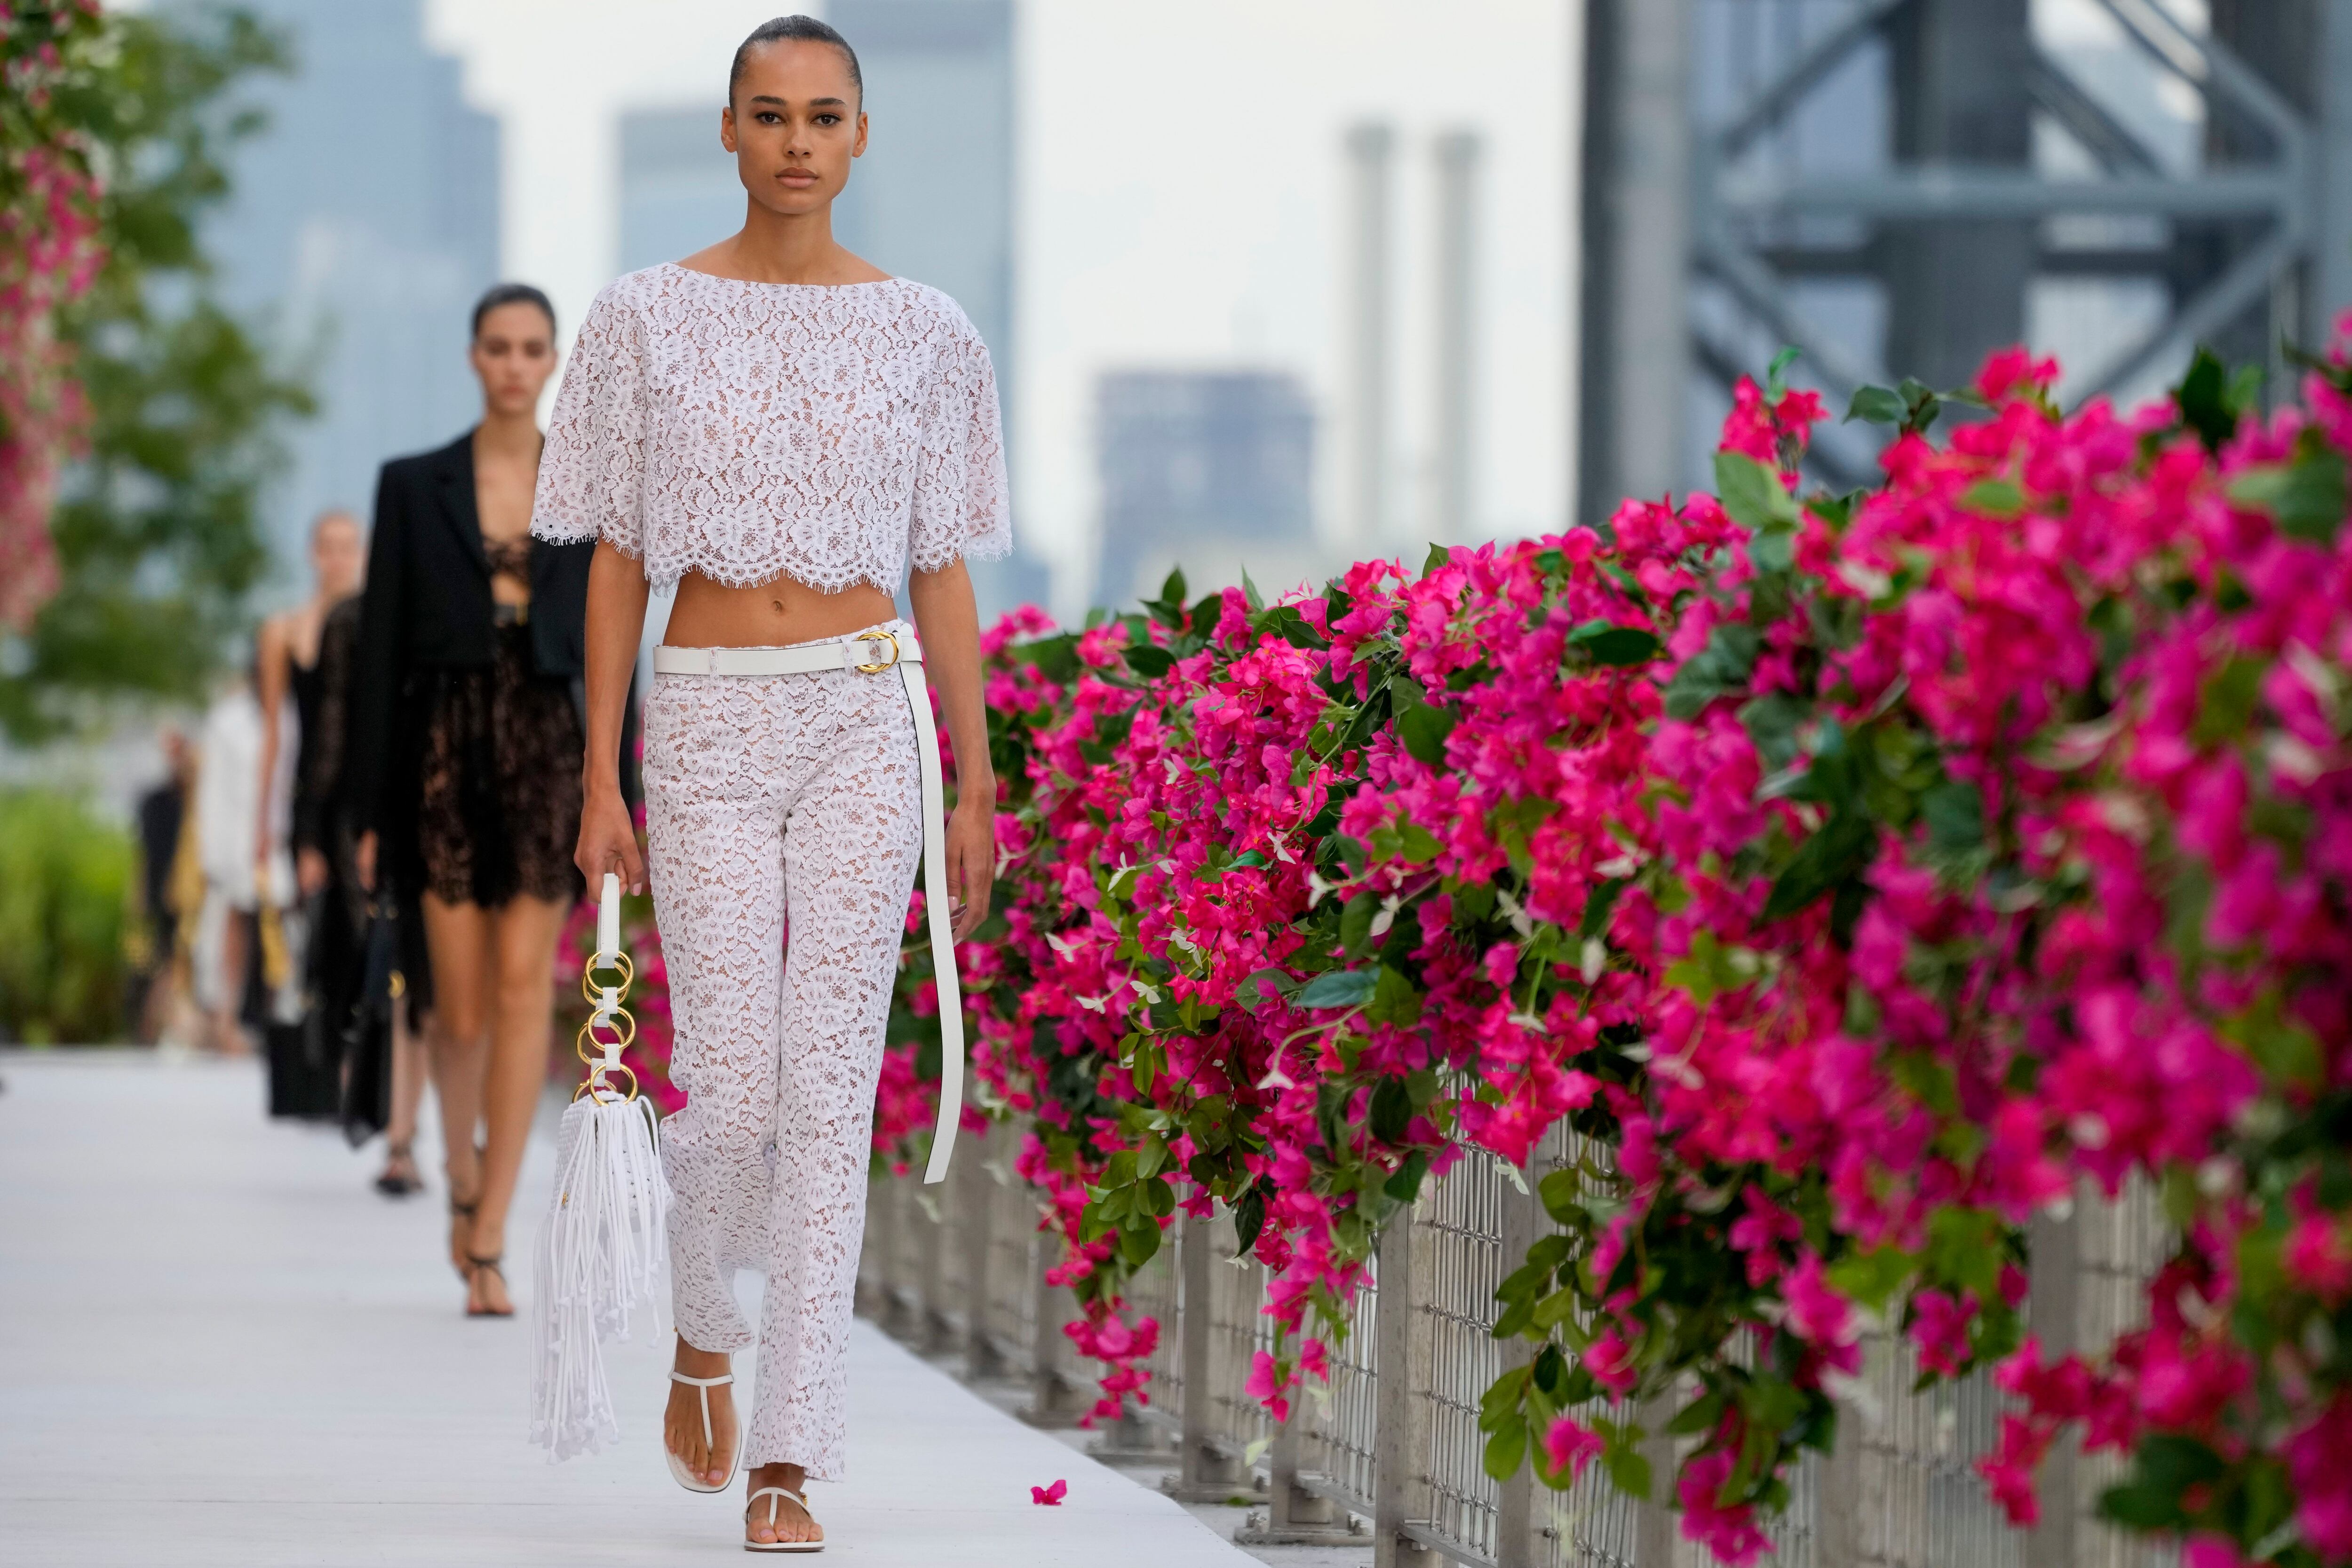 Michael Kors Pays Tribute To Late Mother With Waterfront Runway Show Set To Bacharach Tunes